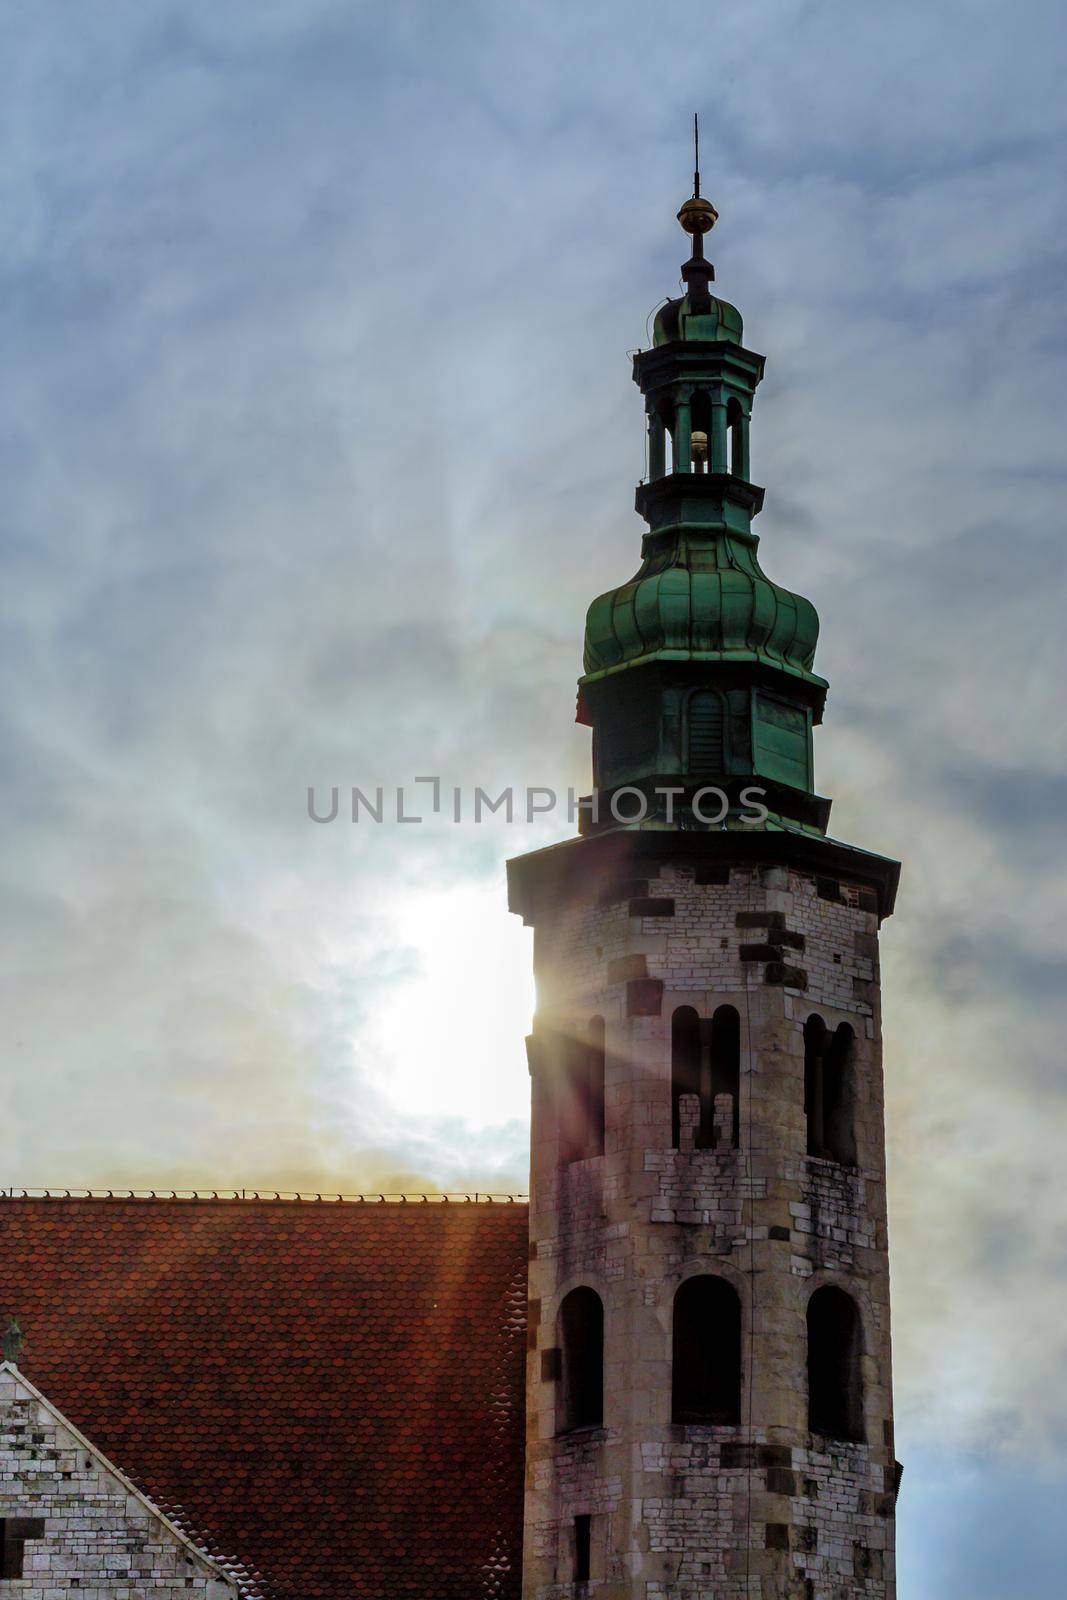 Church Saints Peter Paul Old Town, Krakow, Poland. Bell tower in the sun rays through the clouds